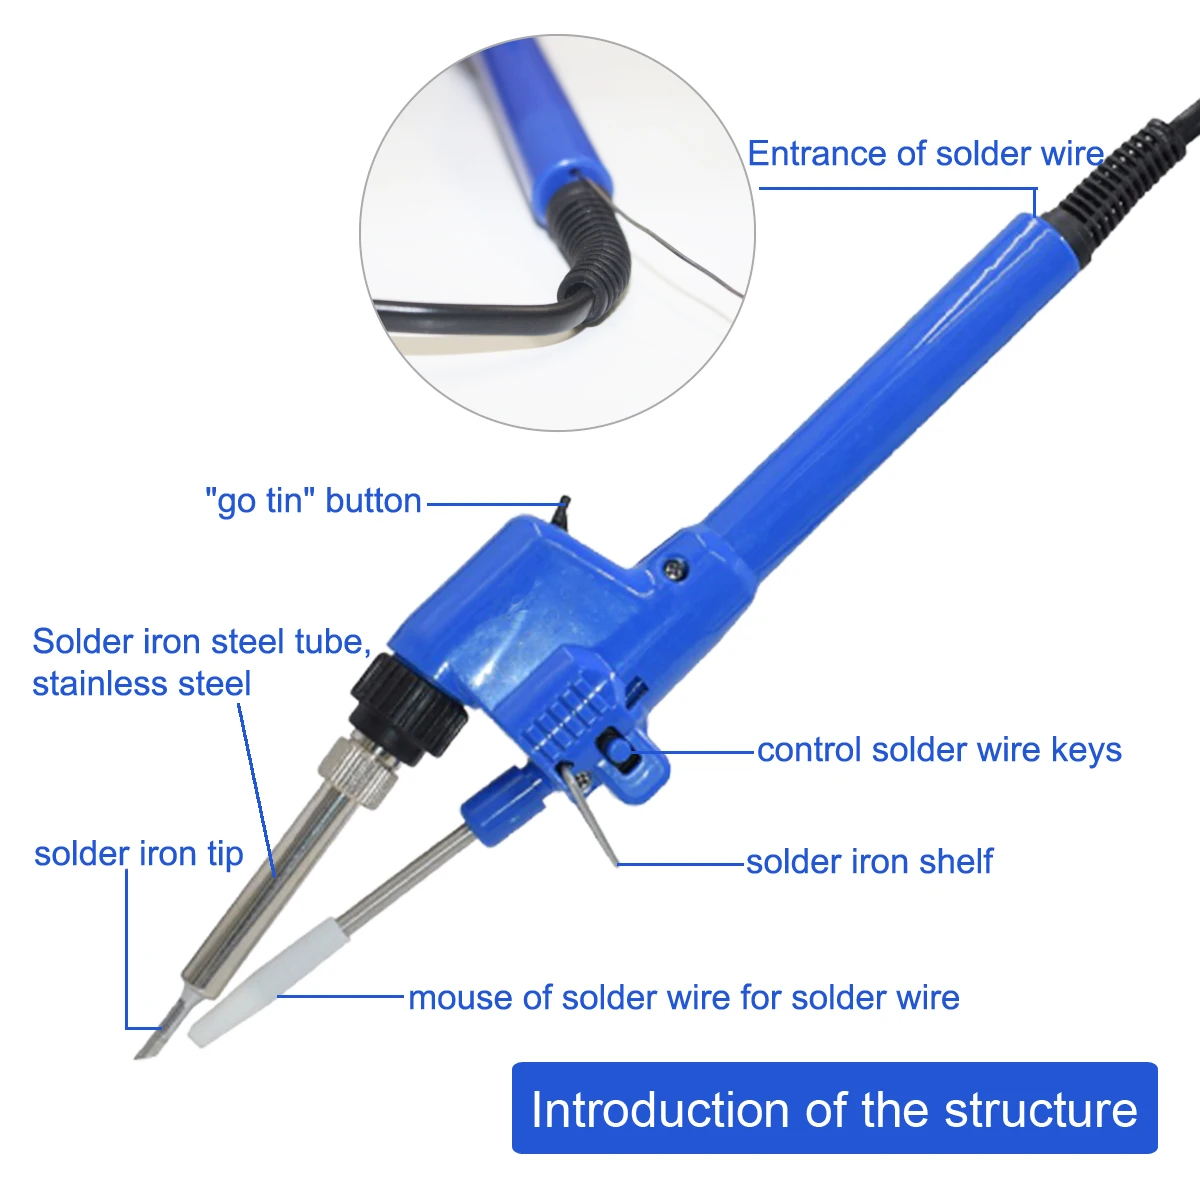 60W Mains Soldering Iron with 0.6mm tip 240V Mains 